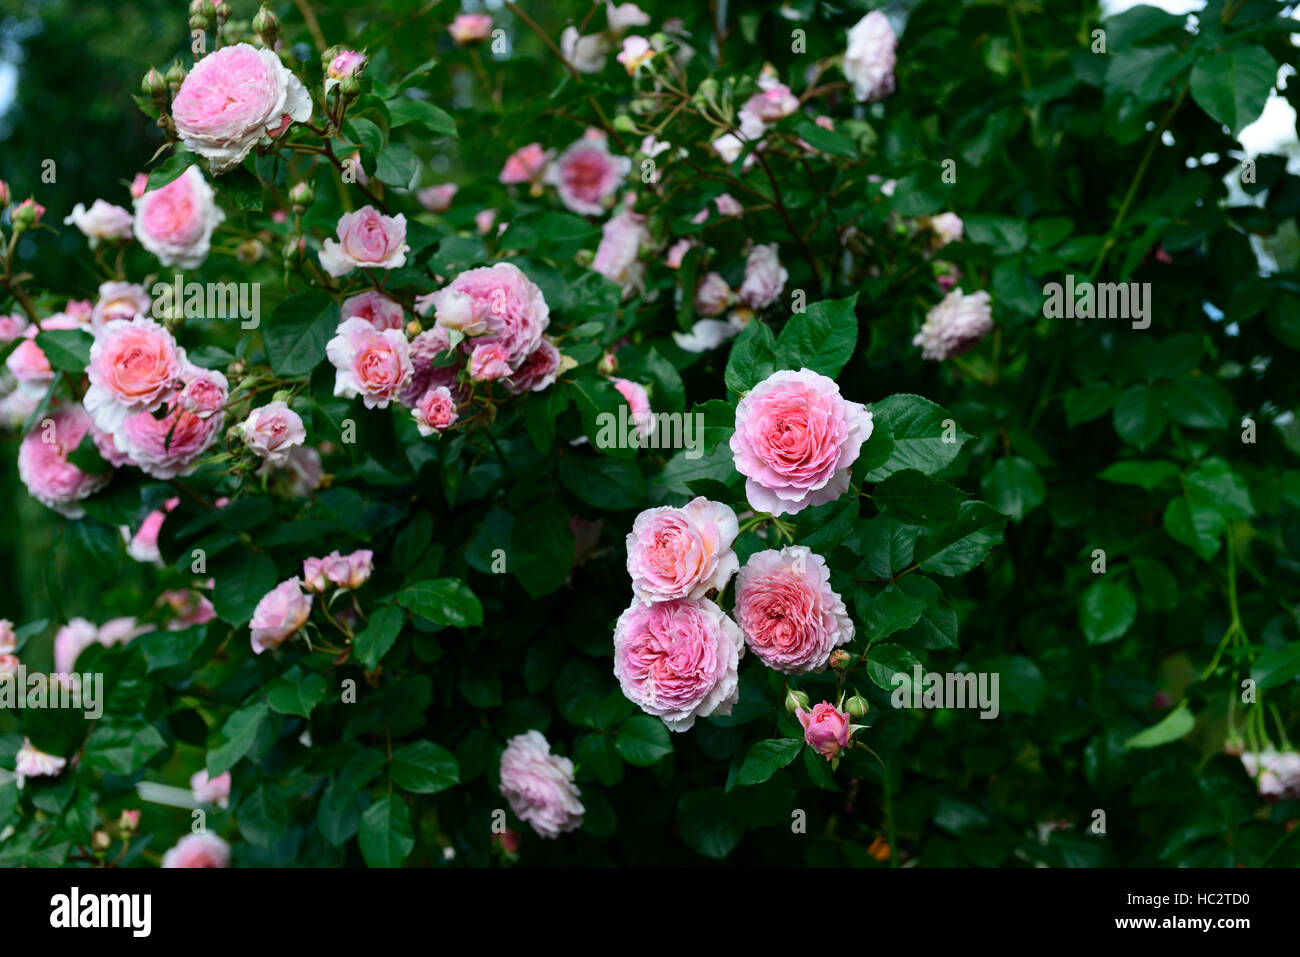 rosa james galway auscrystal rose flower pink climber climbing flowering  flowers fragrant scented RM Floral Stock Photo - Alamy